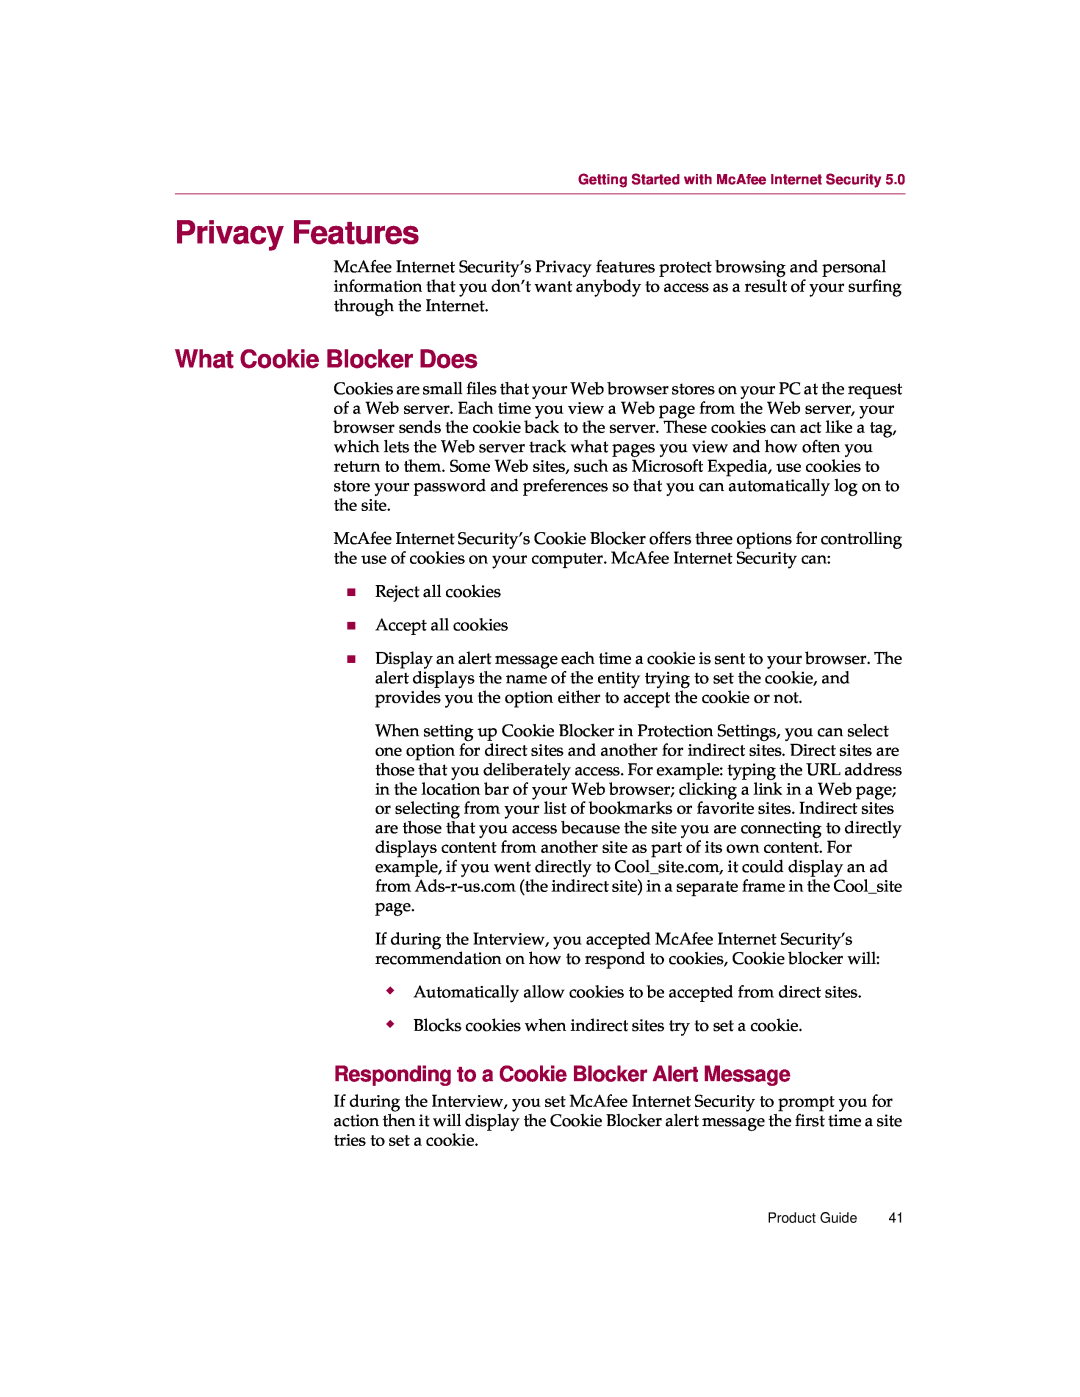 McAfee 5 manual Privacy Features, What Cookie Blocker Does, Responding to a Cookie Blocker Alert Message 